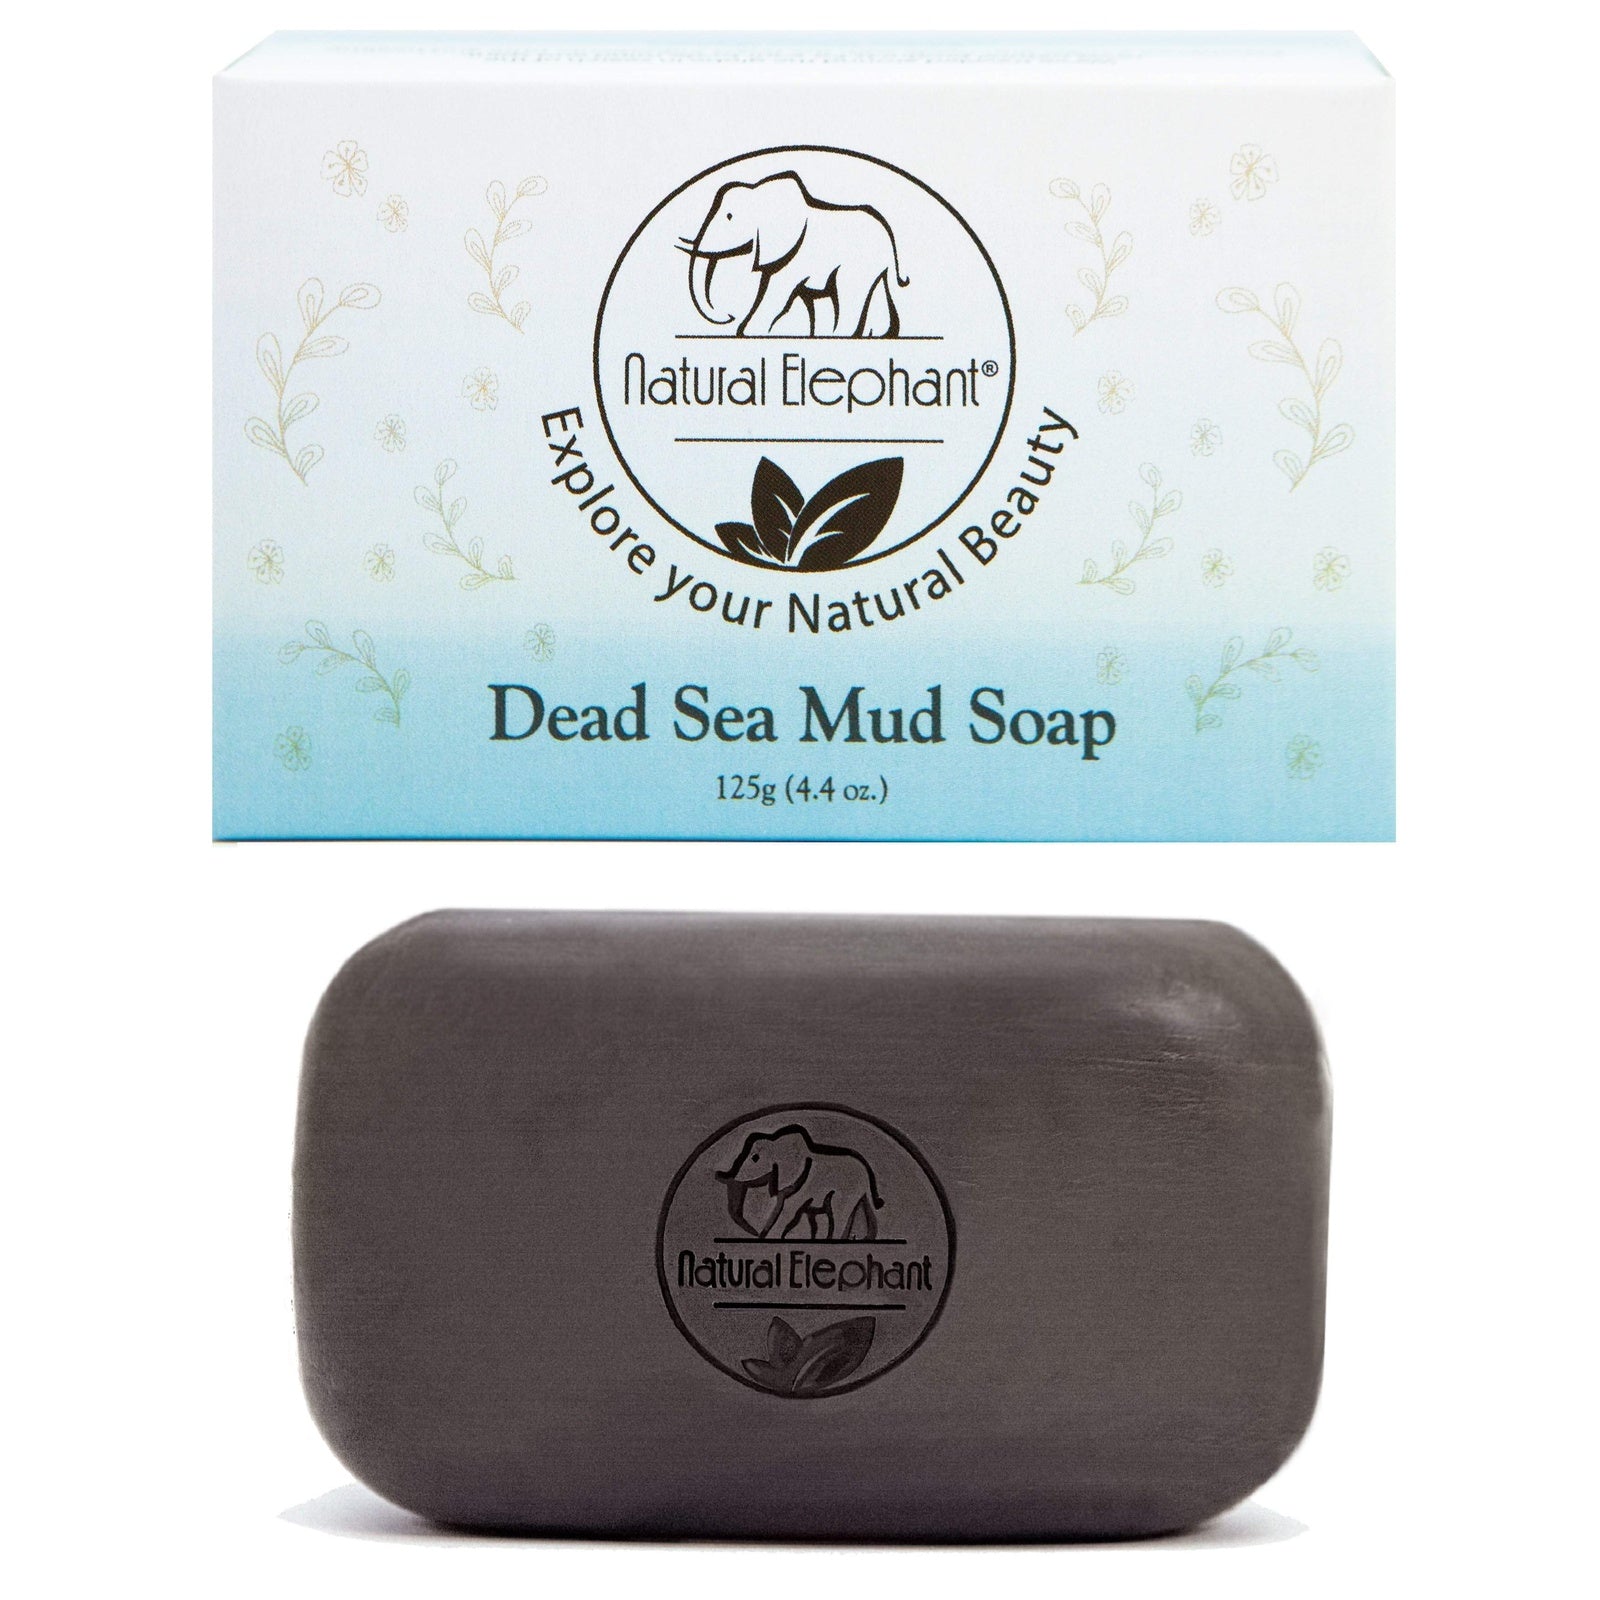 Natural Elephant Dead Sea Mud Soap 4.4 oz-Natural Elephant-BB_Bath and Shower,BB_Scrubs and Exfoliators,BB_Soap Bars,Brand_Natural Elephant,Collection_Bath and Body,Collection_Skincare,Concern_Acne & Blemishes,Concern_Combination Skin,Concern_Dry Skin,Concern_Large Pores,Concern_Psoriasis,Concern_Redness,Concern_Sensitive Skin,FABS_Friday2022,NATURAL_Dead Sea Collection,Skincare_Cleansers